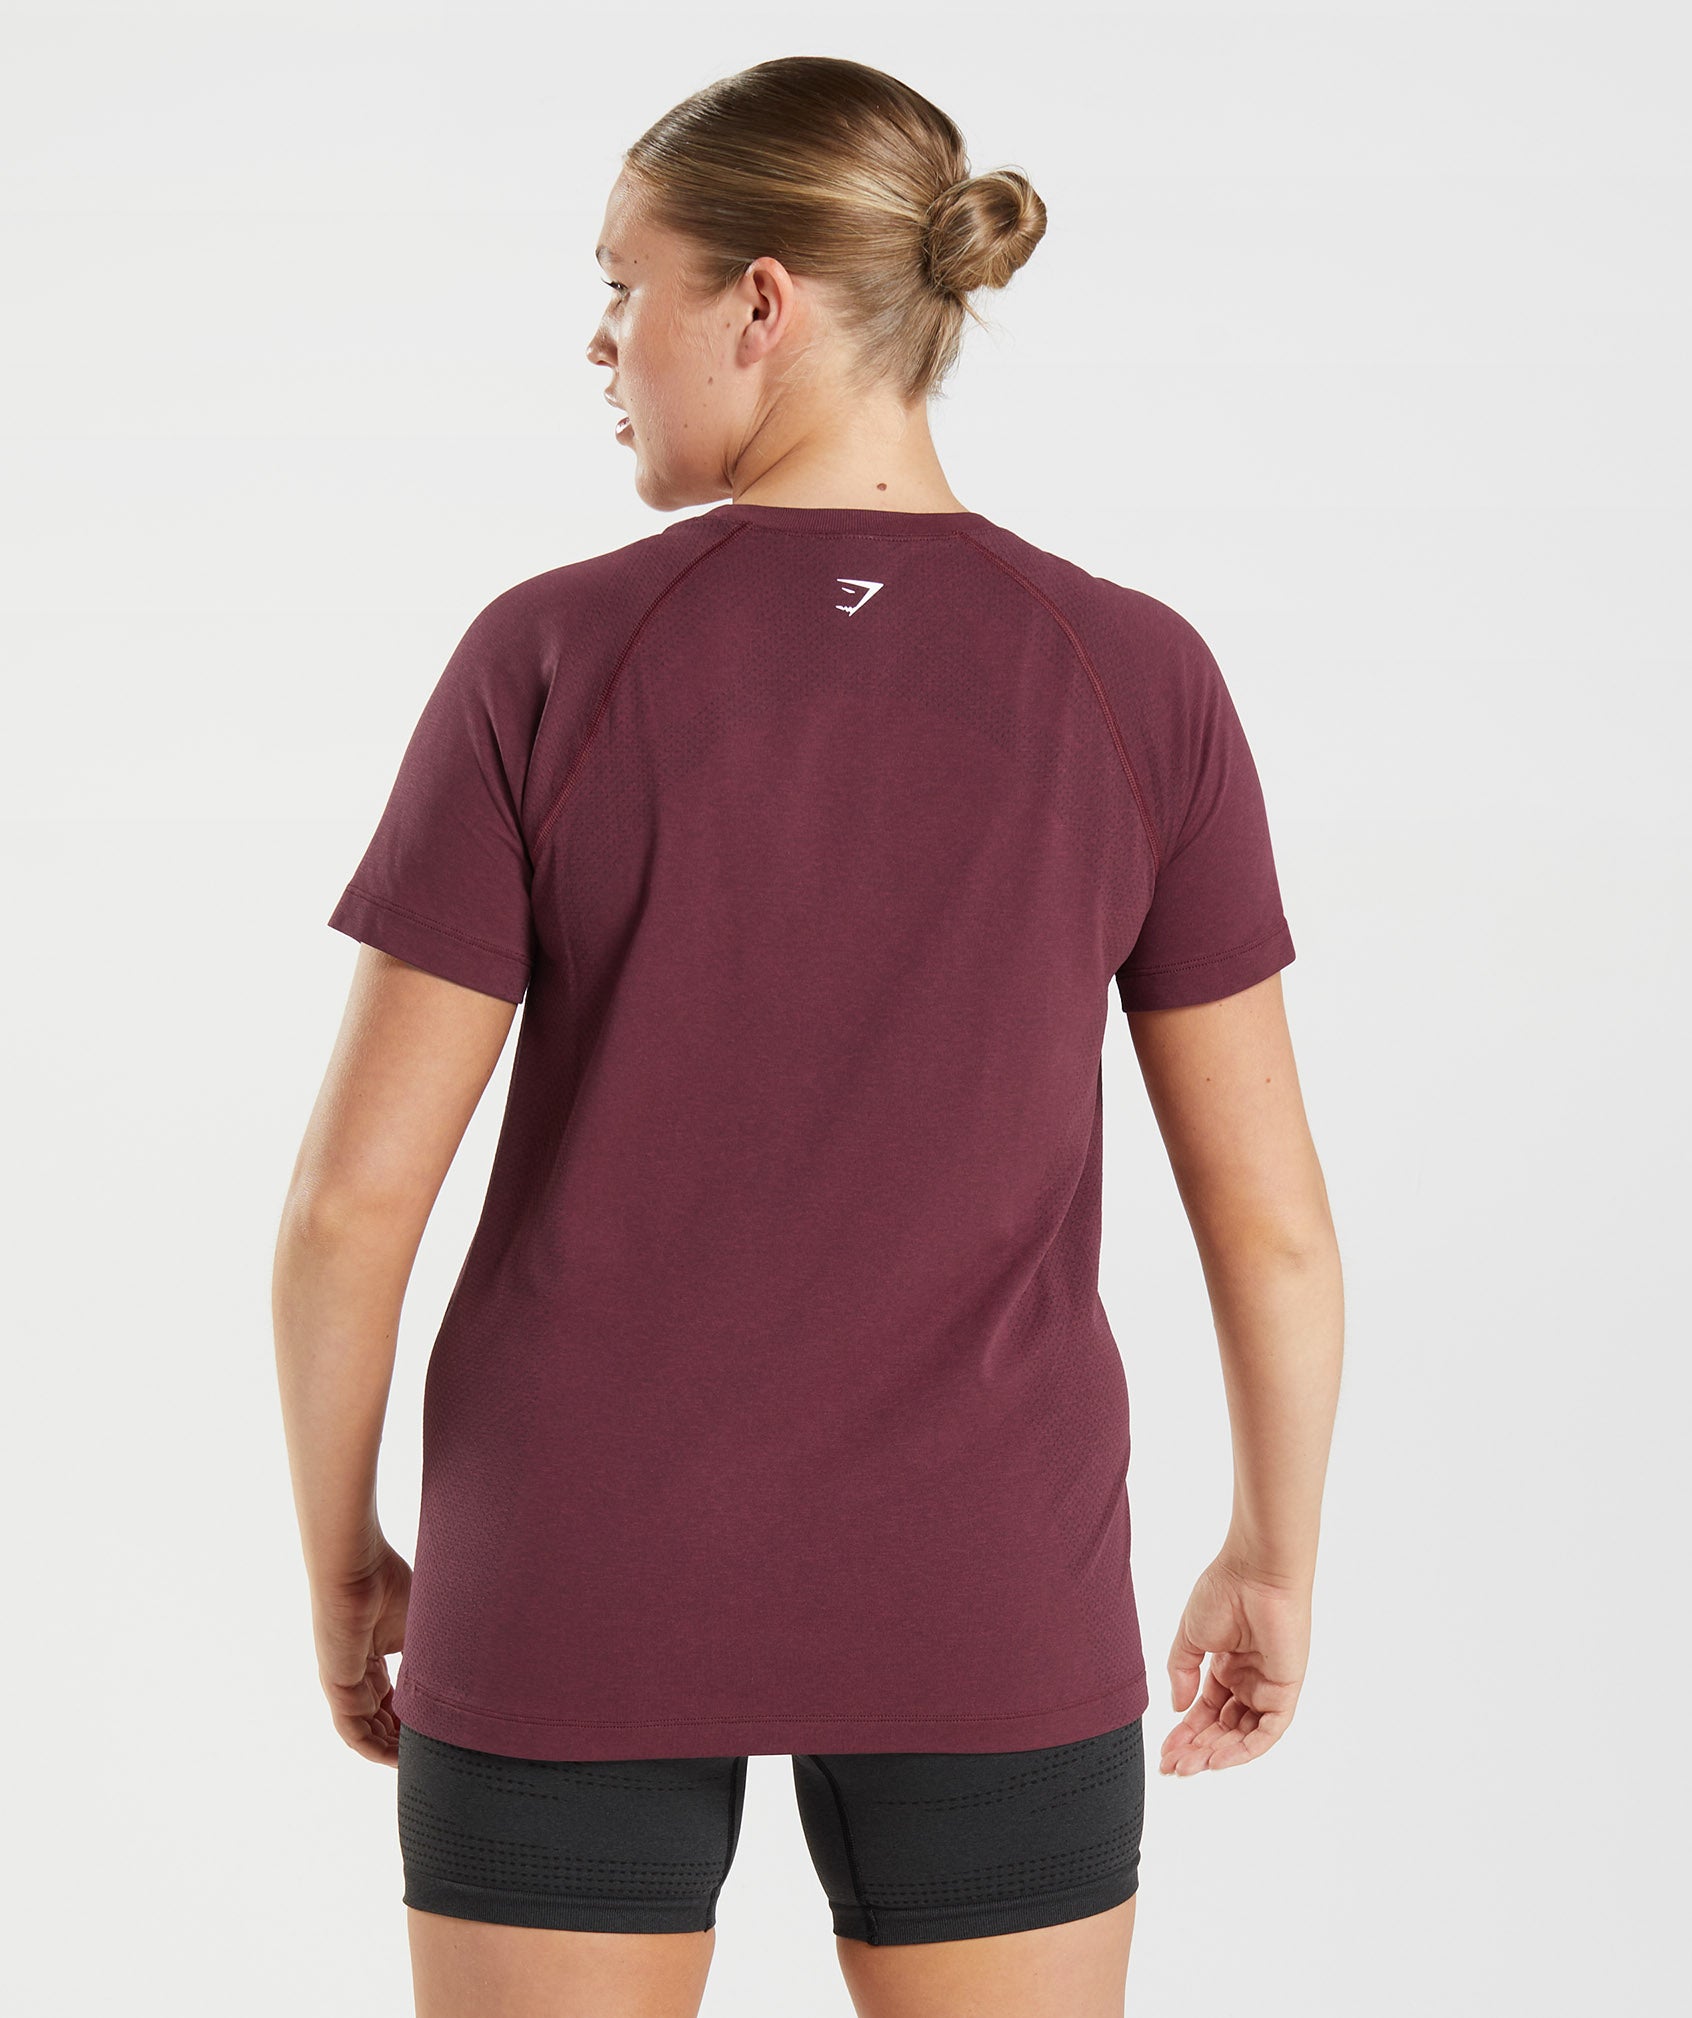 Vital Seamless 2.0 Light T-Shirt in Baked Maroon Marl - view 2